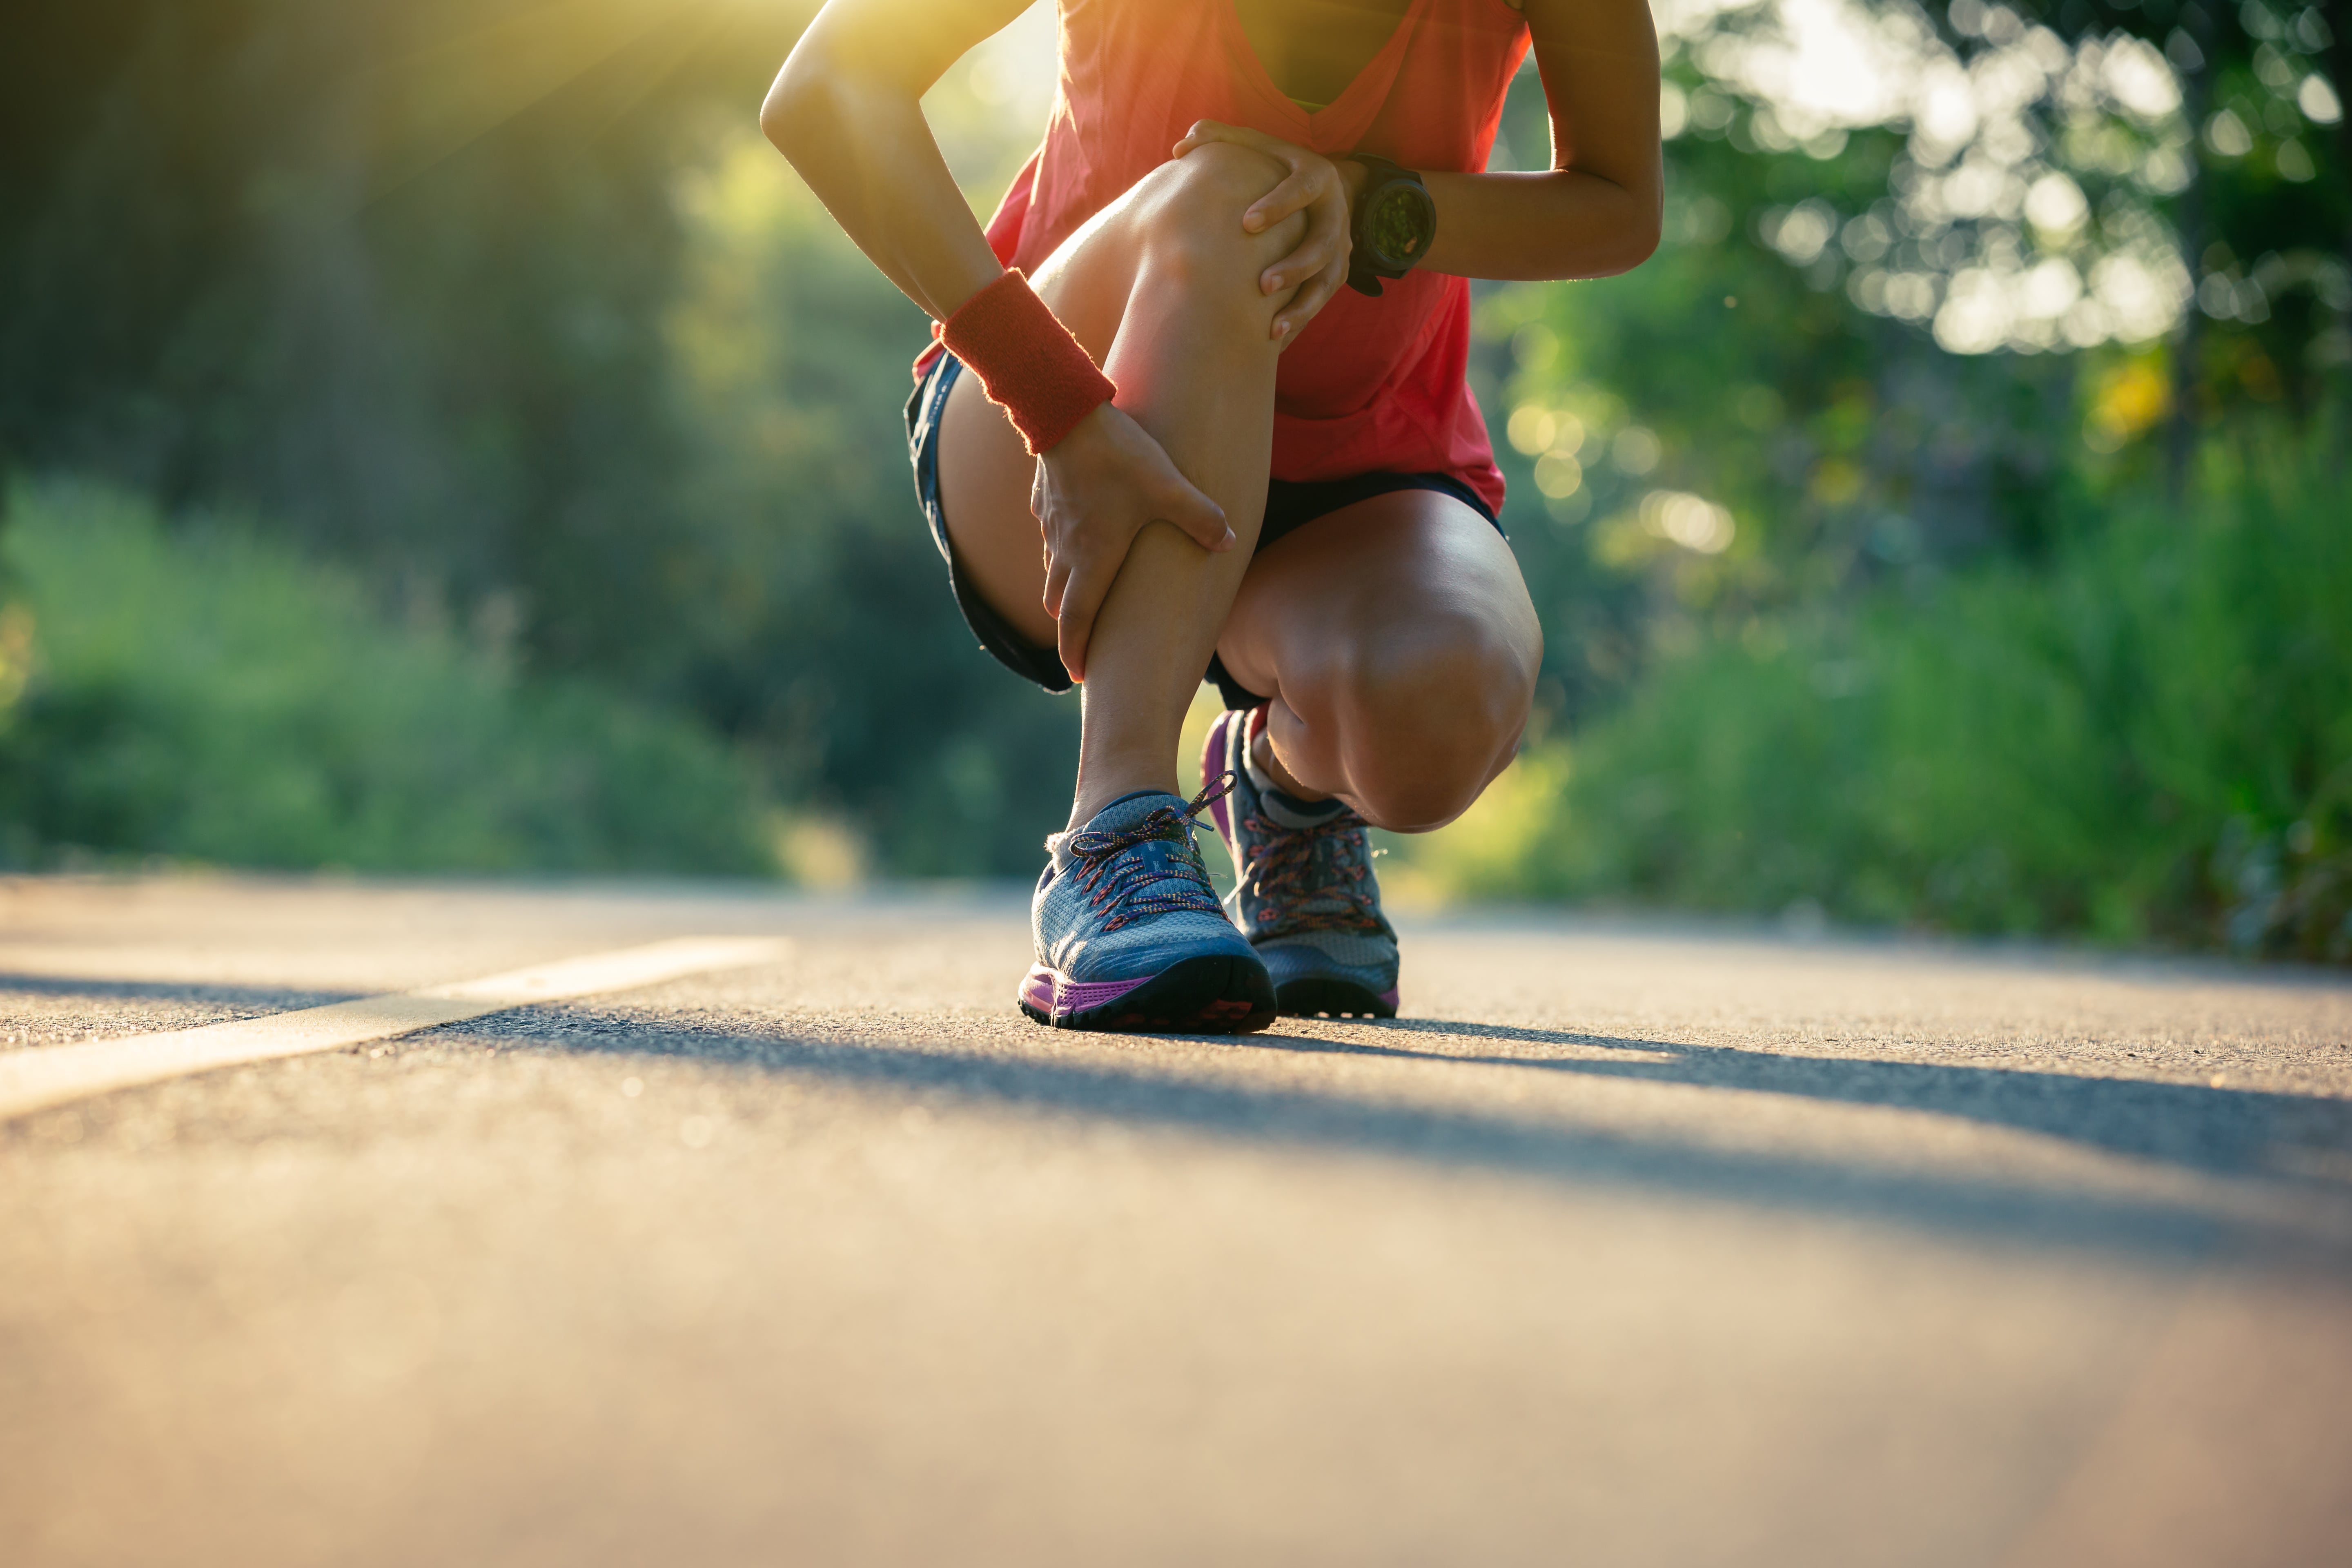 Tips for Runners to Prevent Foot and Ankle Injuries